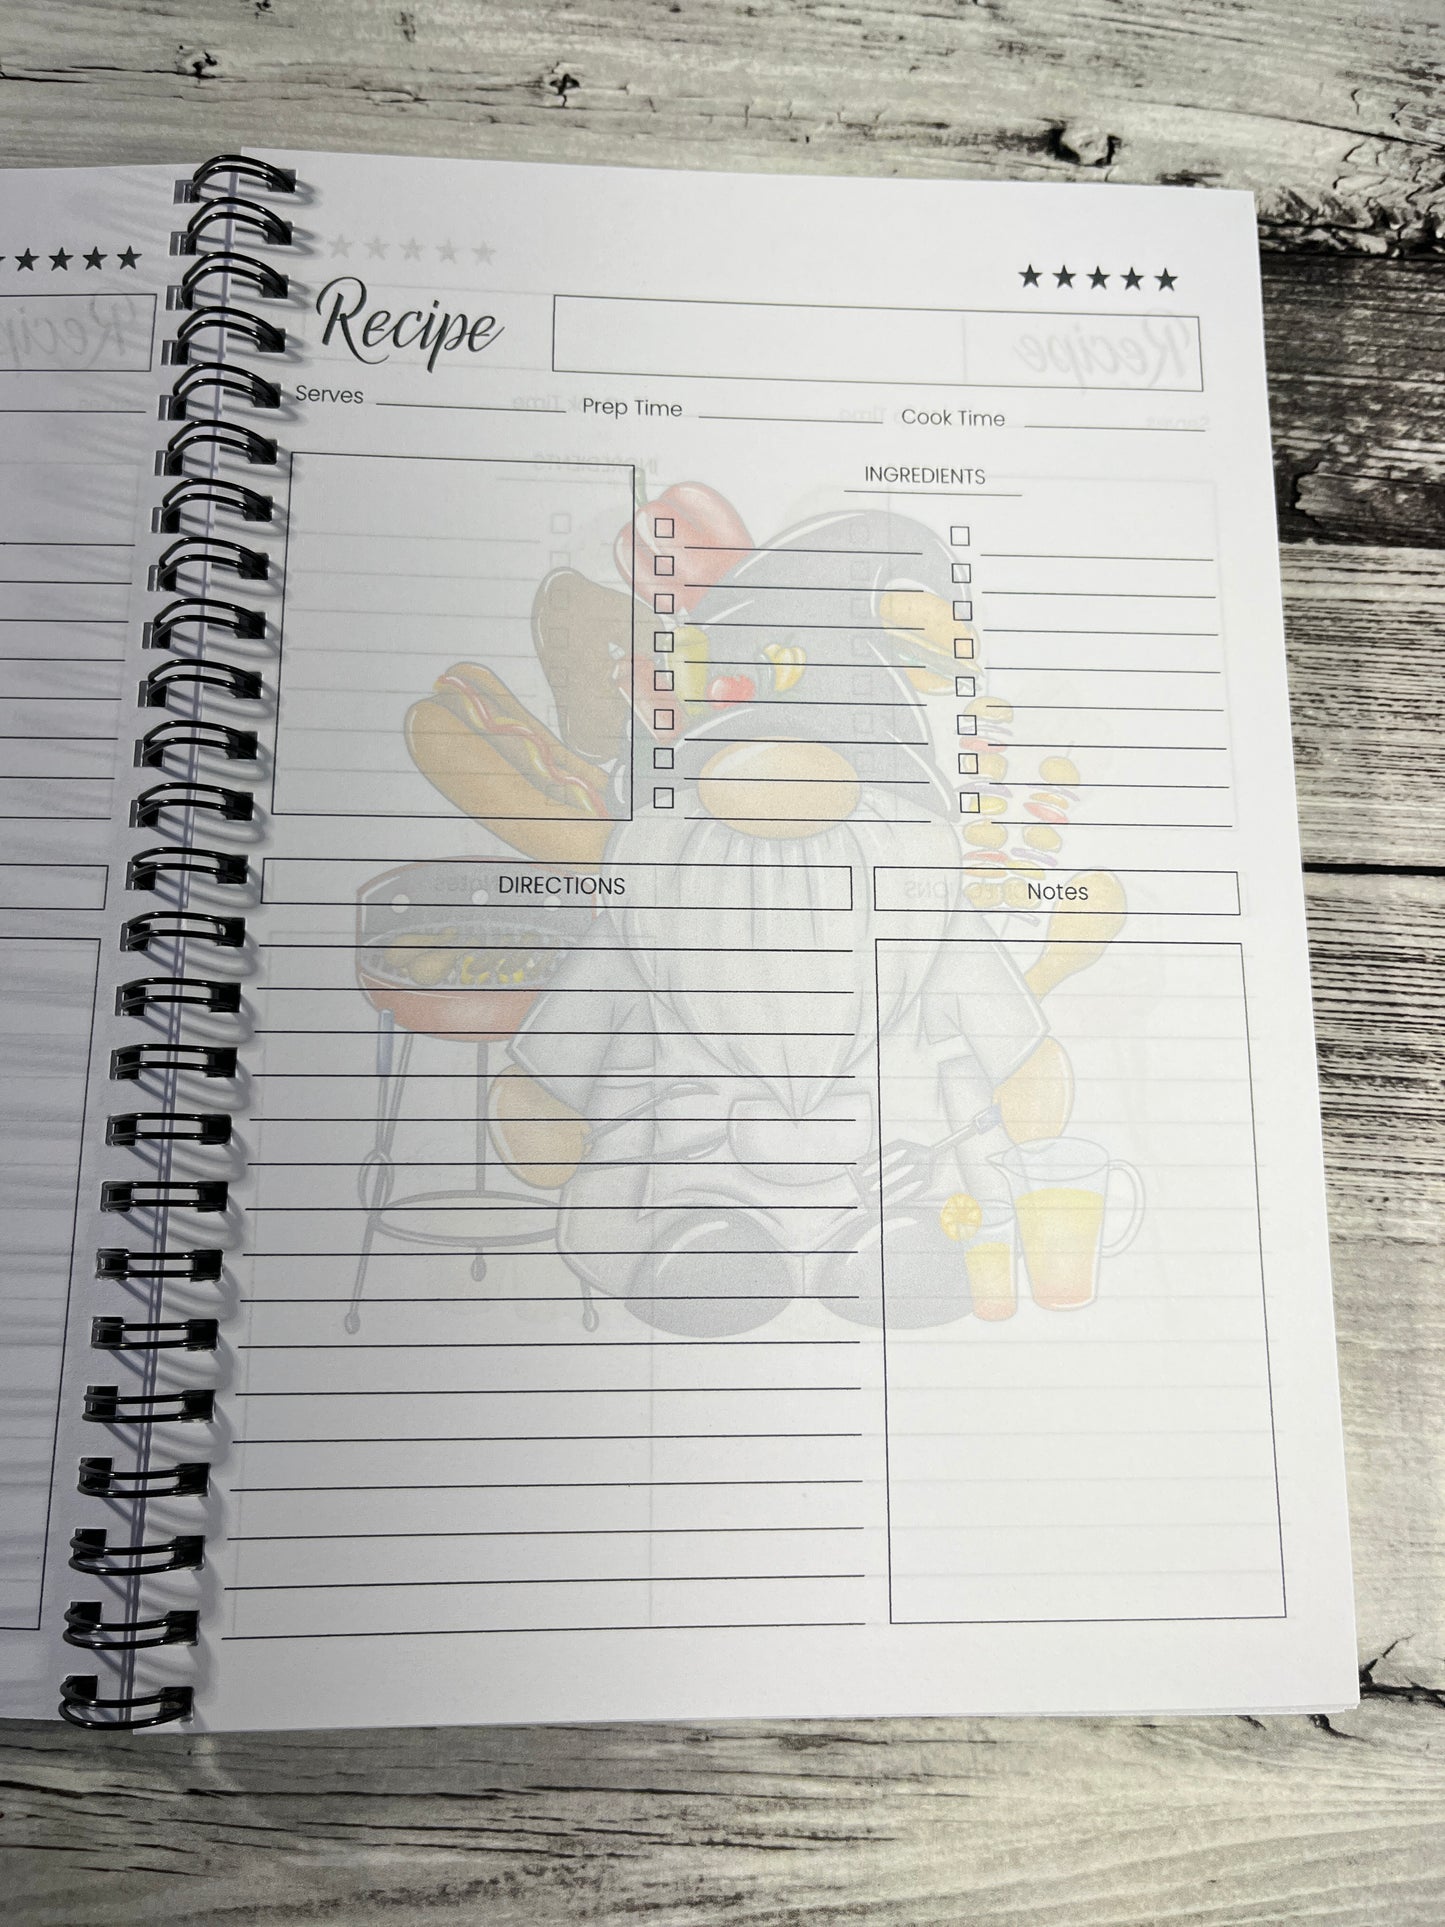 Personalised BBQ theme recipe book- fathers day gift | birthday gift | gonk theme gift